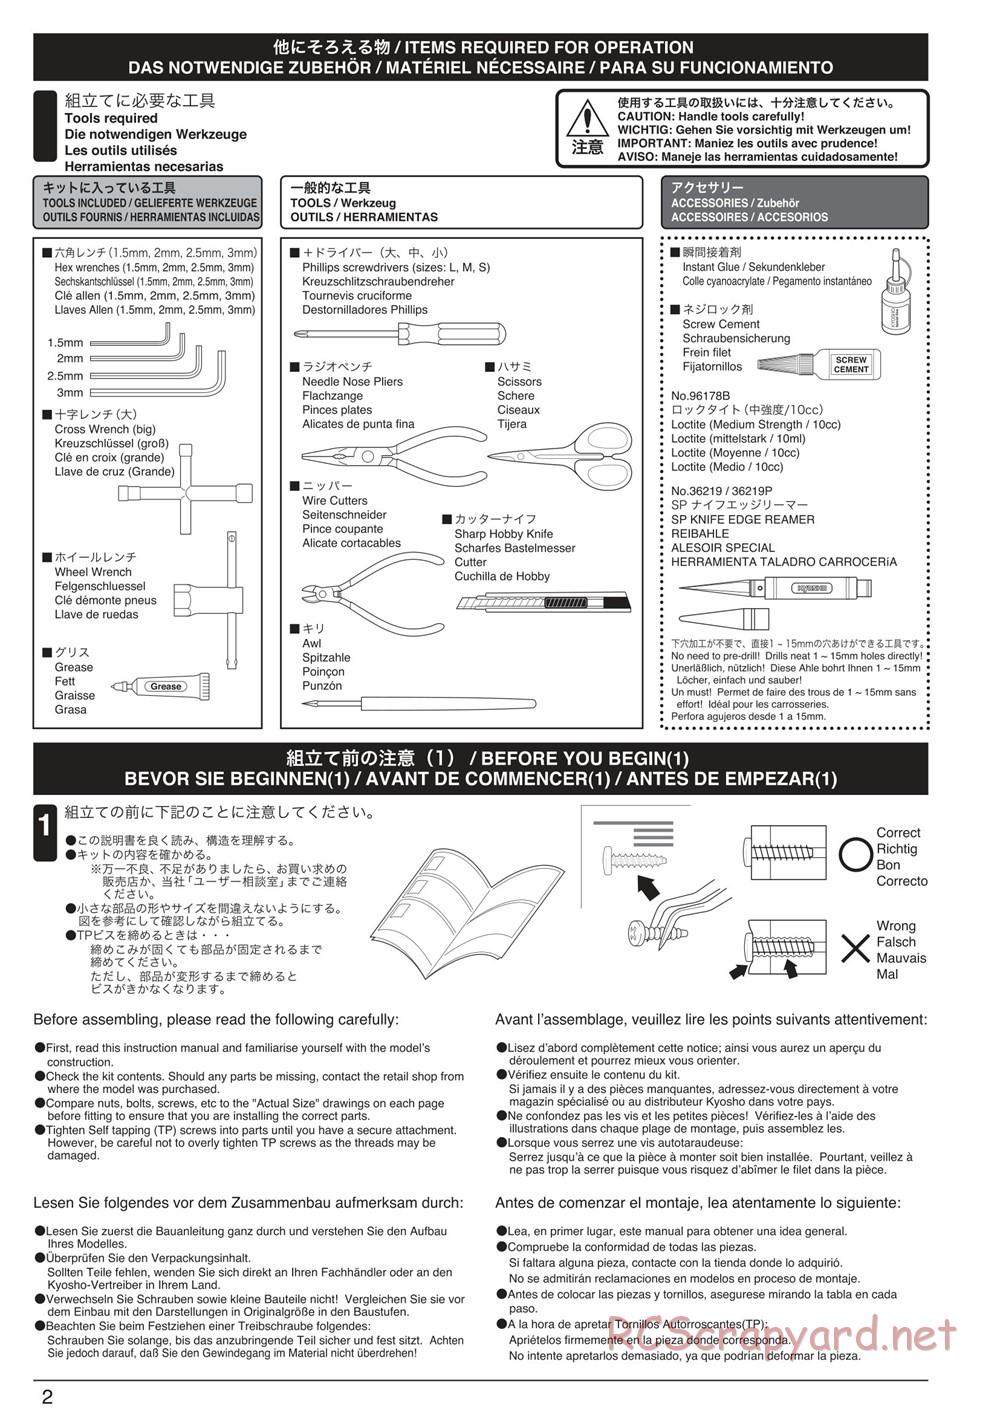 Kyosho - Mad Crusher VE - Manual - Page 2